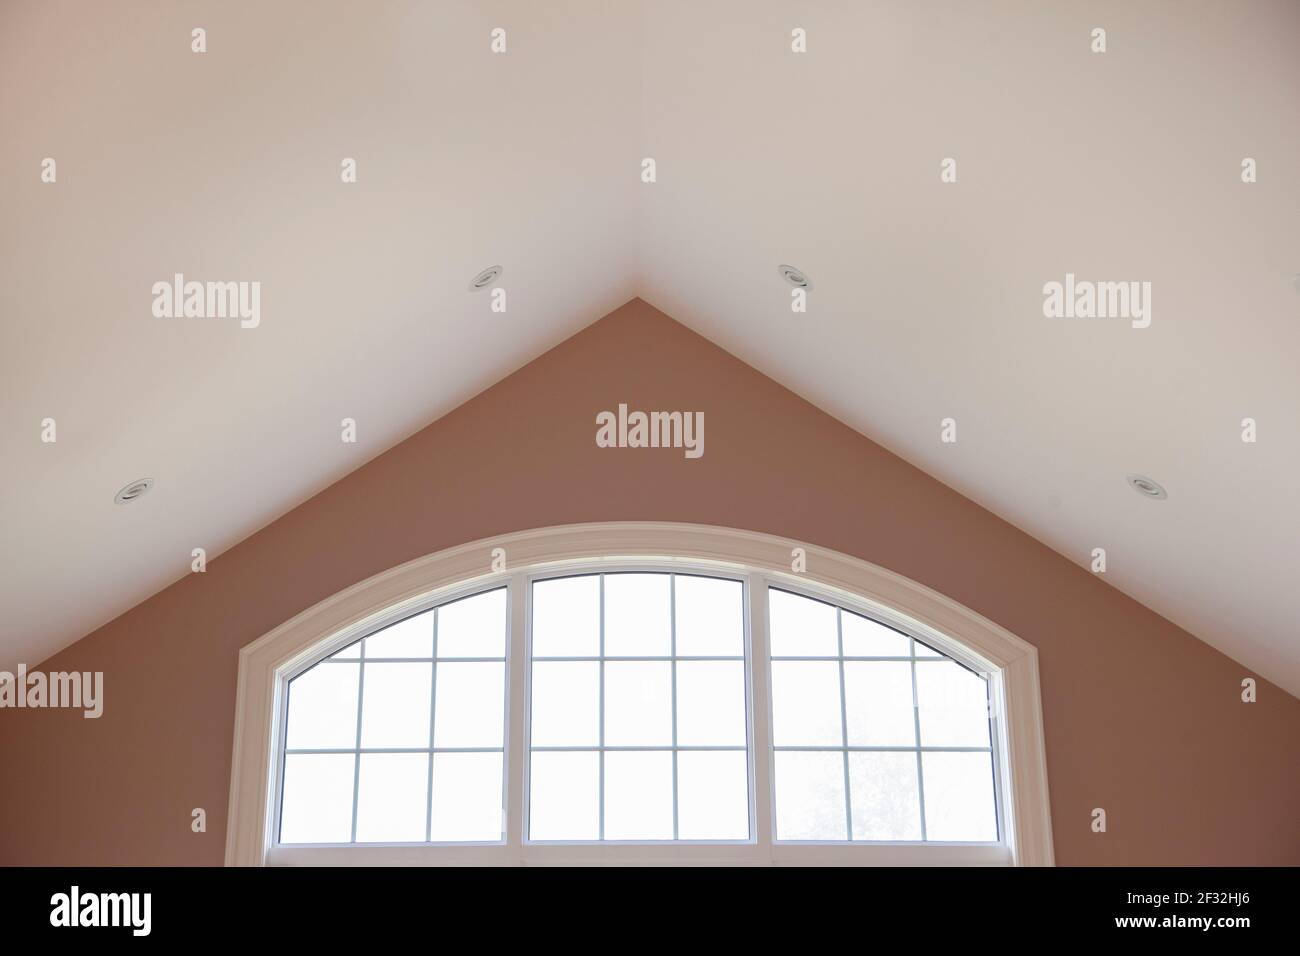 a glass window with white frame set against a big vaulted ceiling in a beautiful home Stock Photo